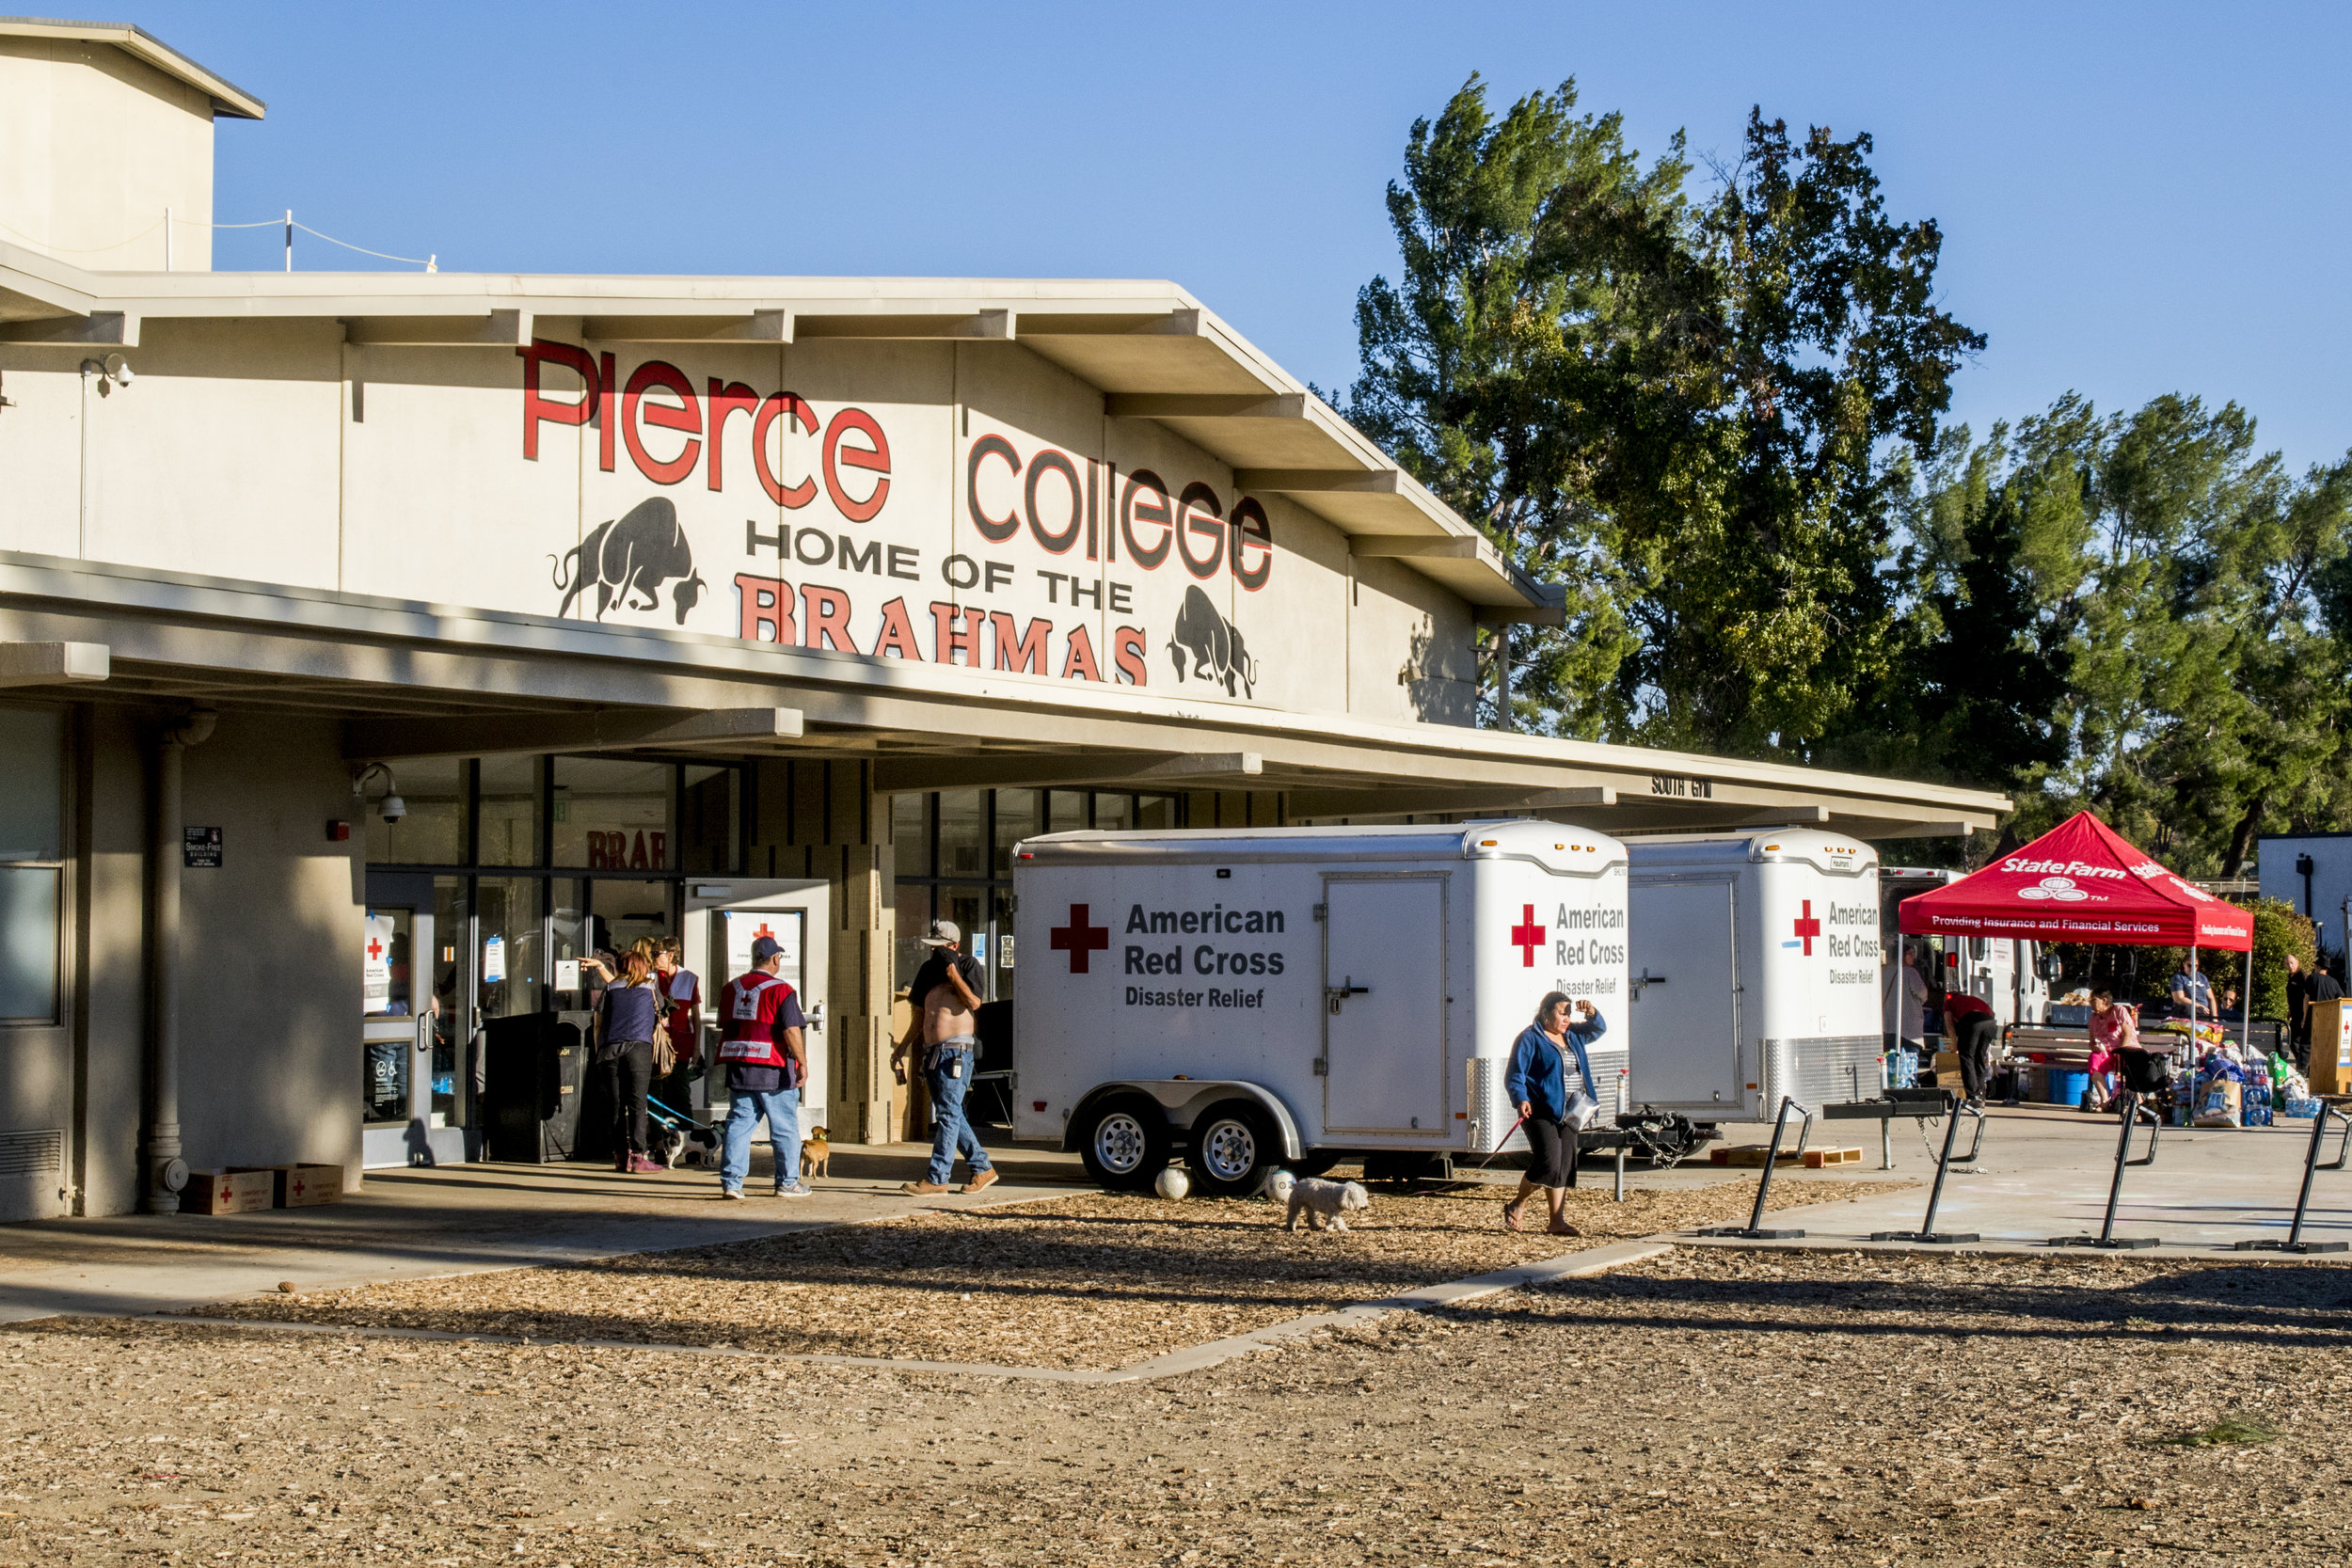  The American Red Cross and State Farm Insurance have set up outside of Pierce Colleges South Gym in Woodland Hills, California on November 9, 2018. The organizations are at the college to provide supplies and support to any person or animal seeking 